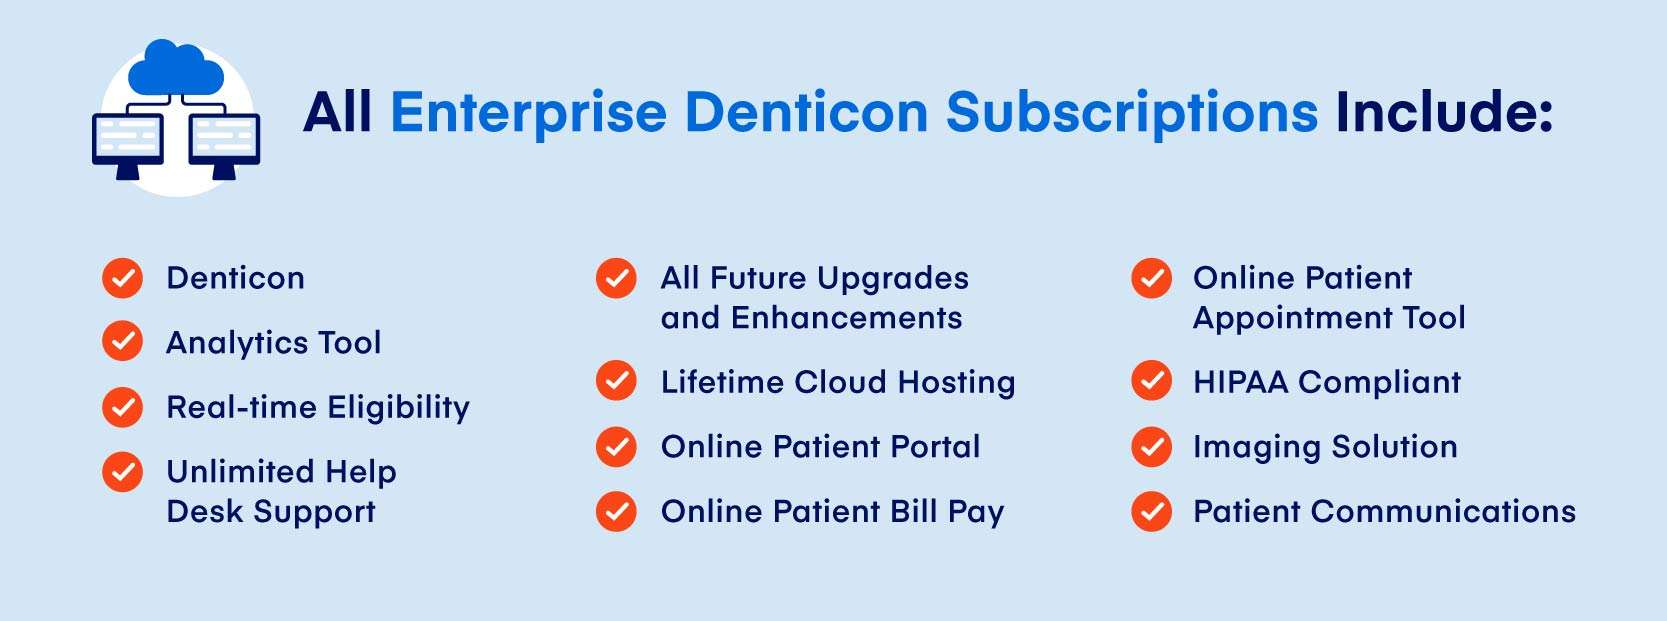 Enterprise Denticon Subscription Features and What's INcluded